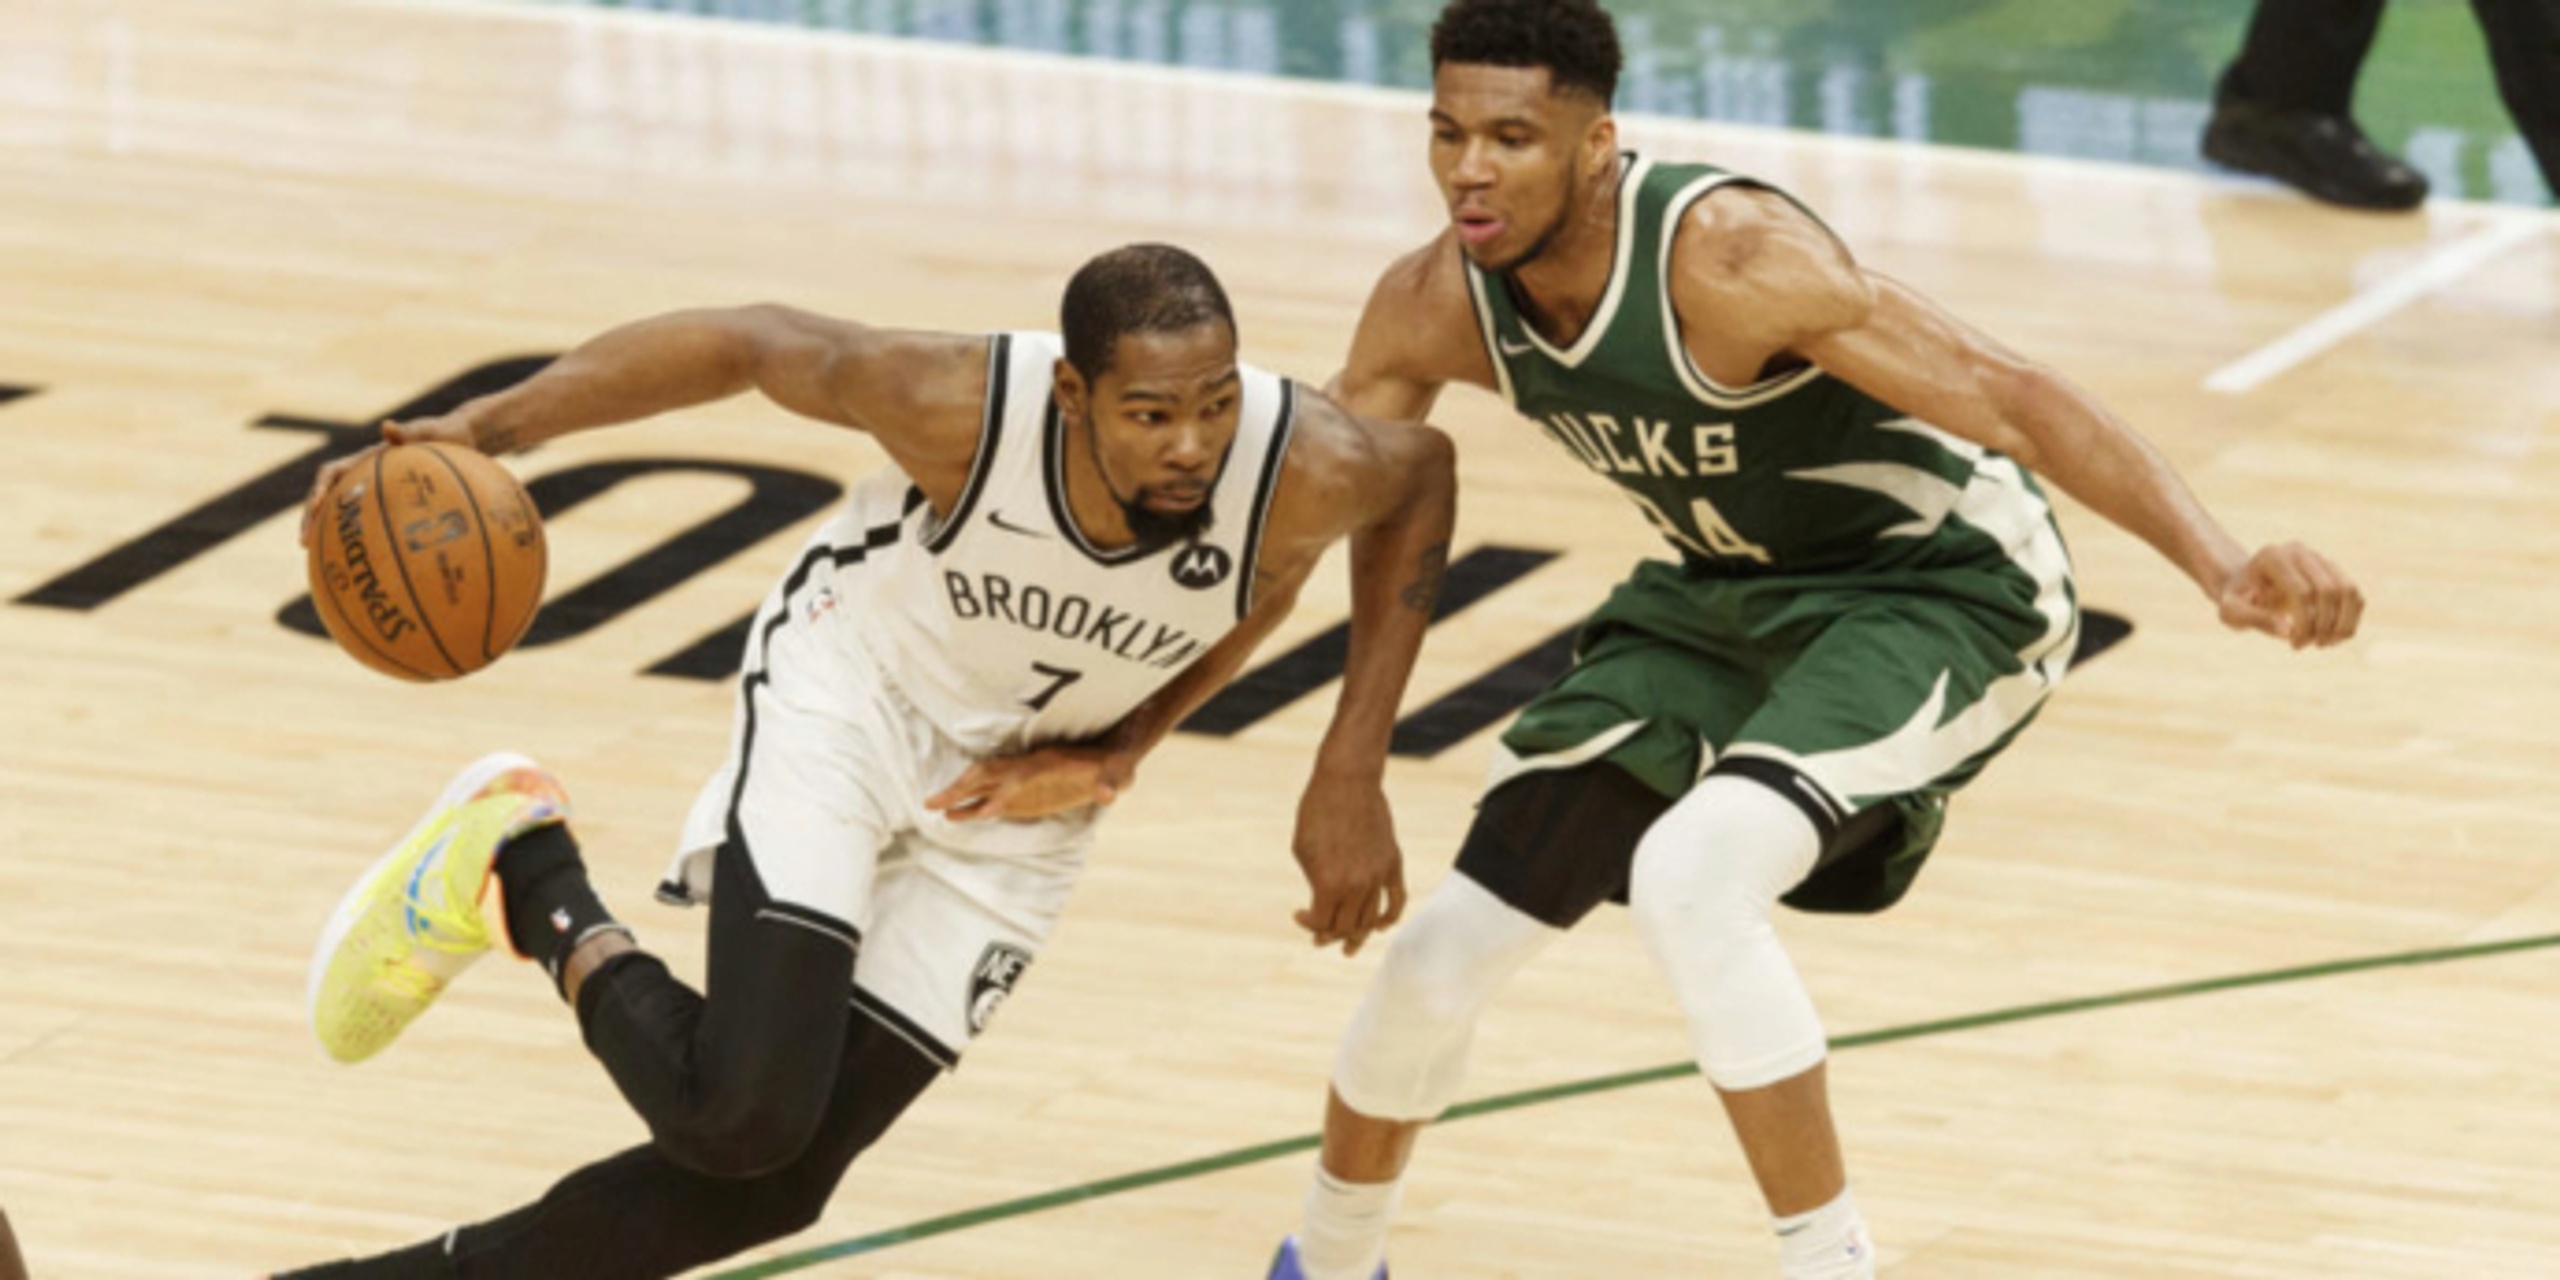 NBA playoff primer: What you should look out for in Nets-Bucks